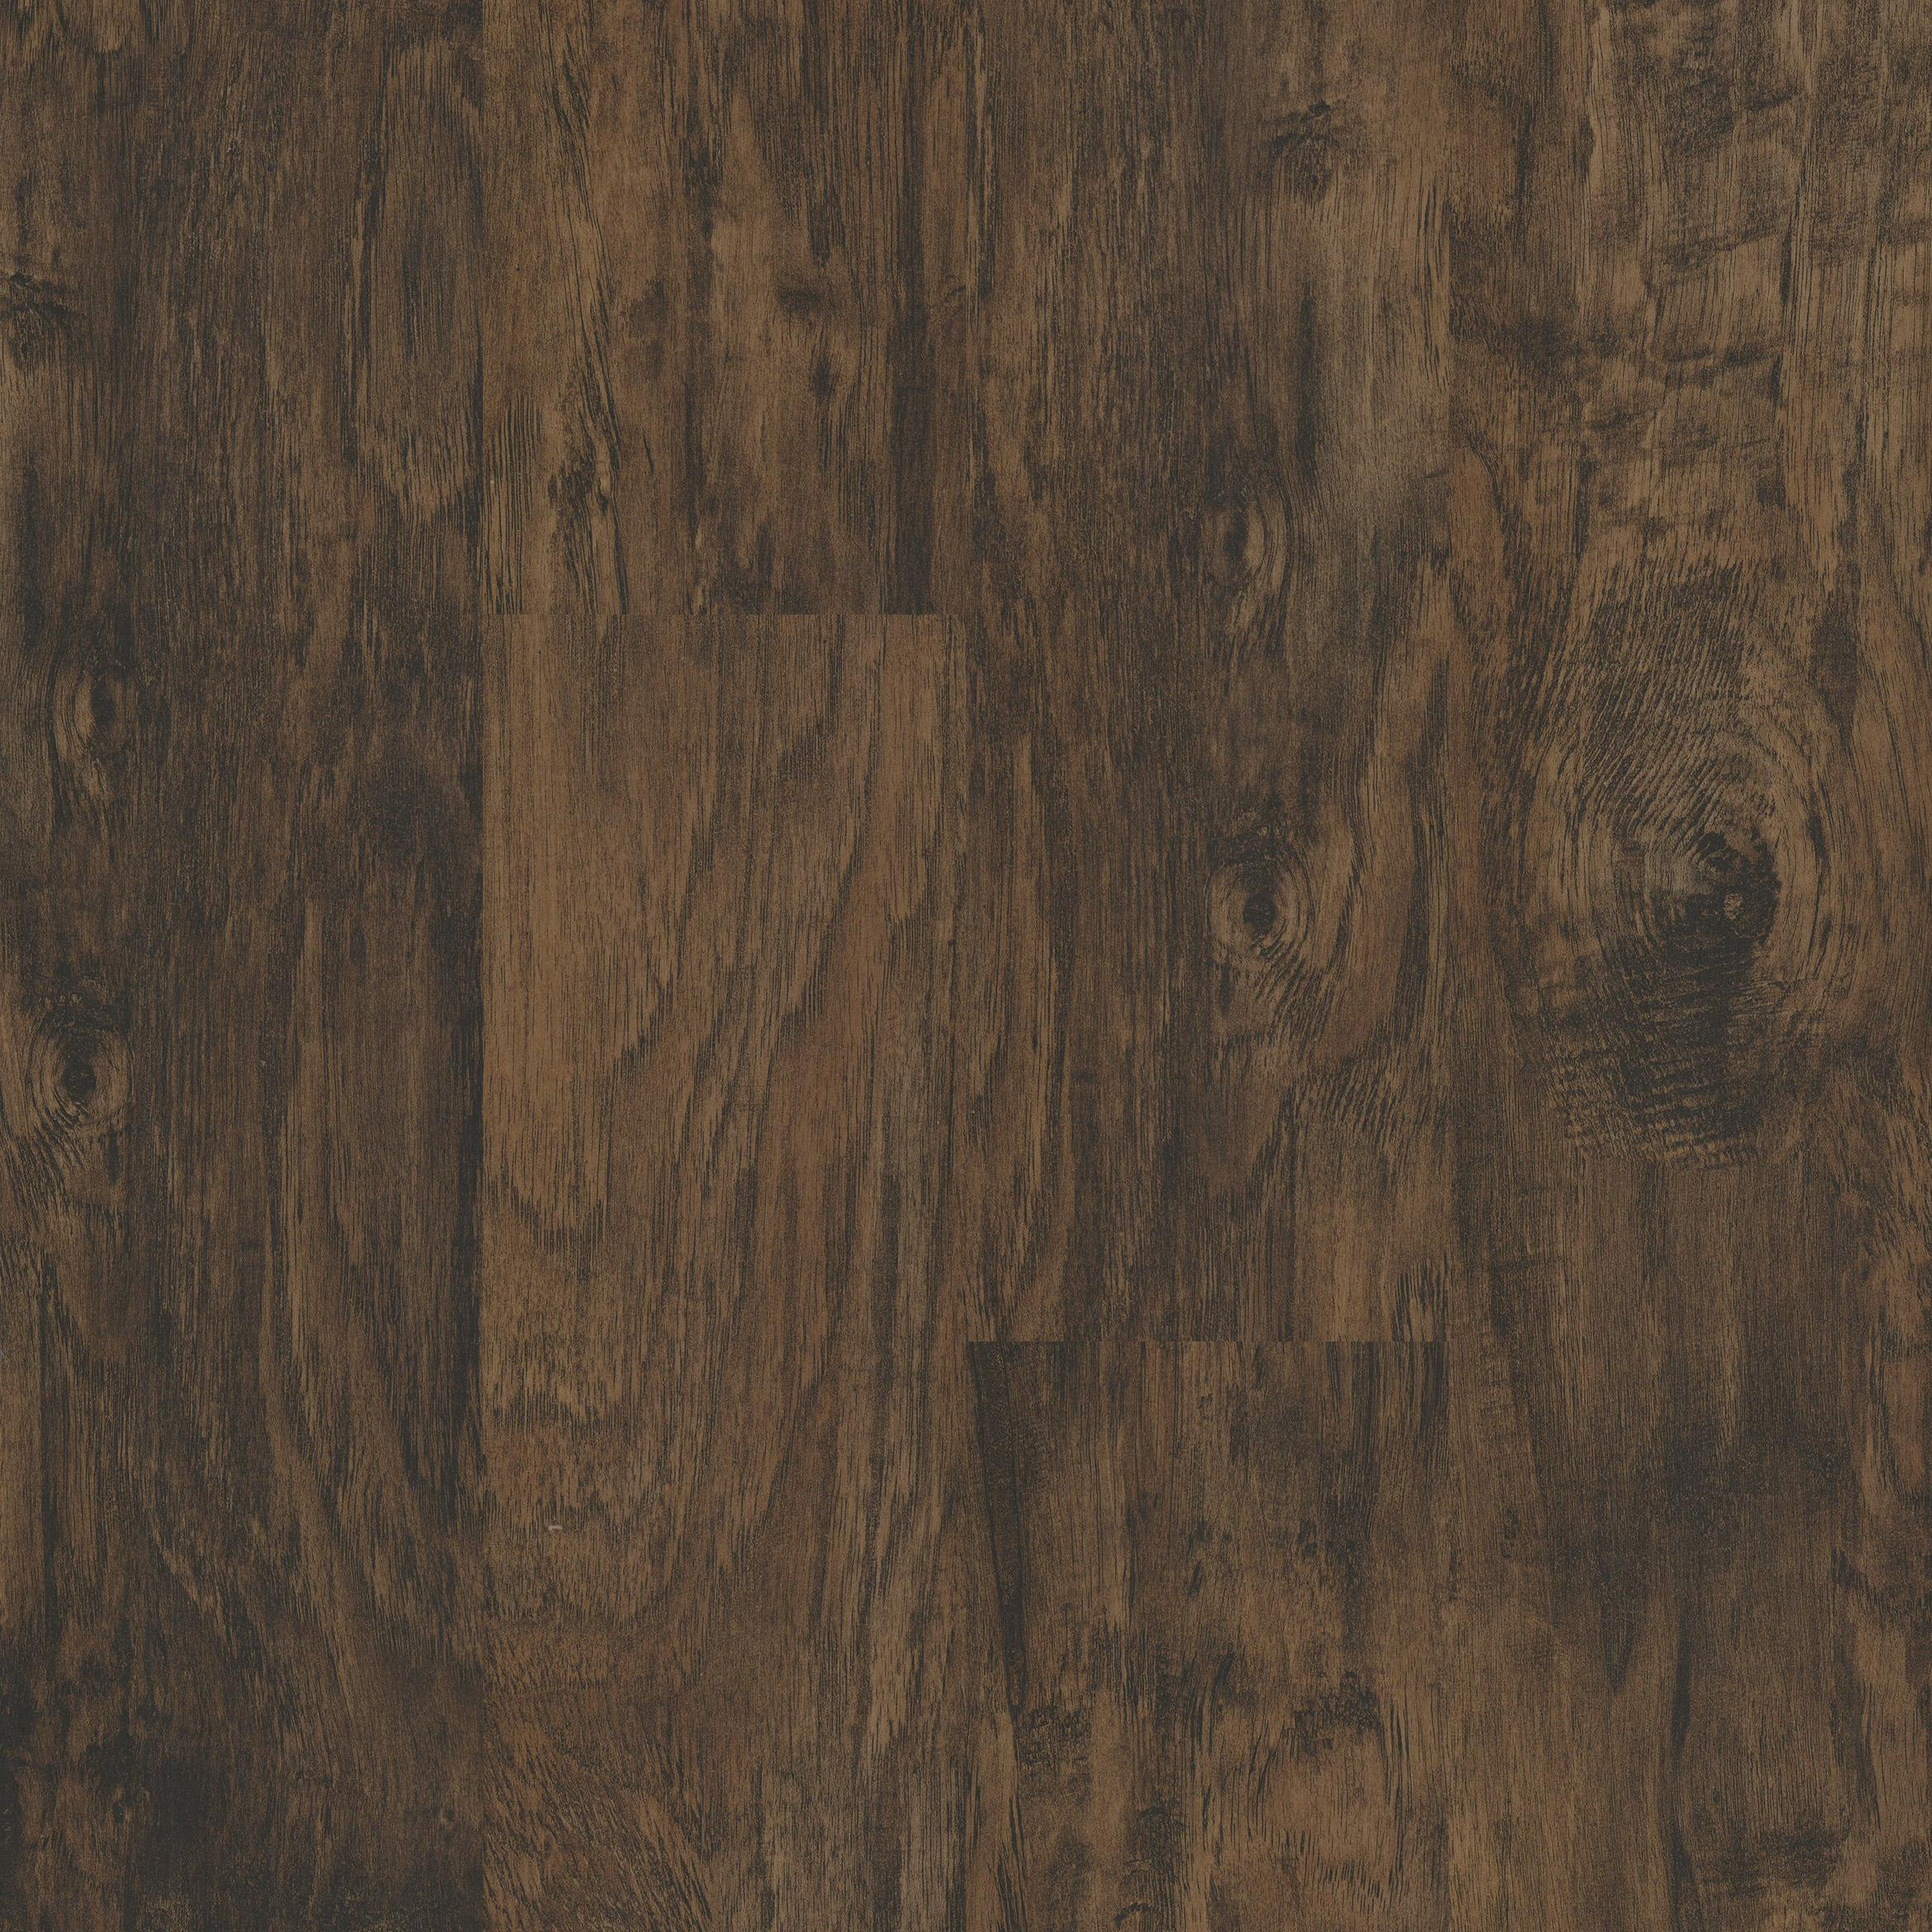 15 Fashionable Hardwood Floor Underlayment Recommendation 2024 free download hardwood floor underlayment recommendation of ivc moduleo liberty click hickory grove 6 waterproof click together with regard to ivc moduleo liberty click hickory grove 6 waterproof click to